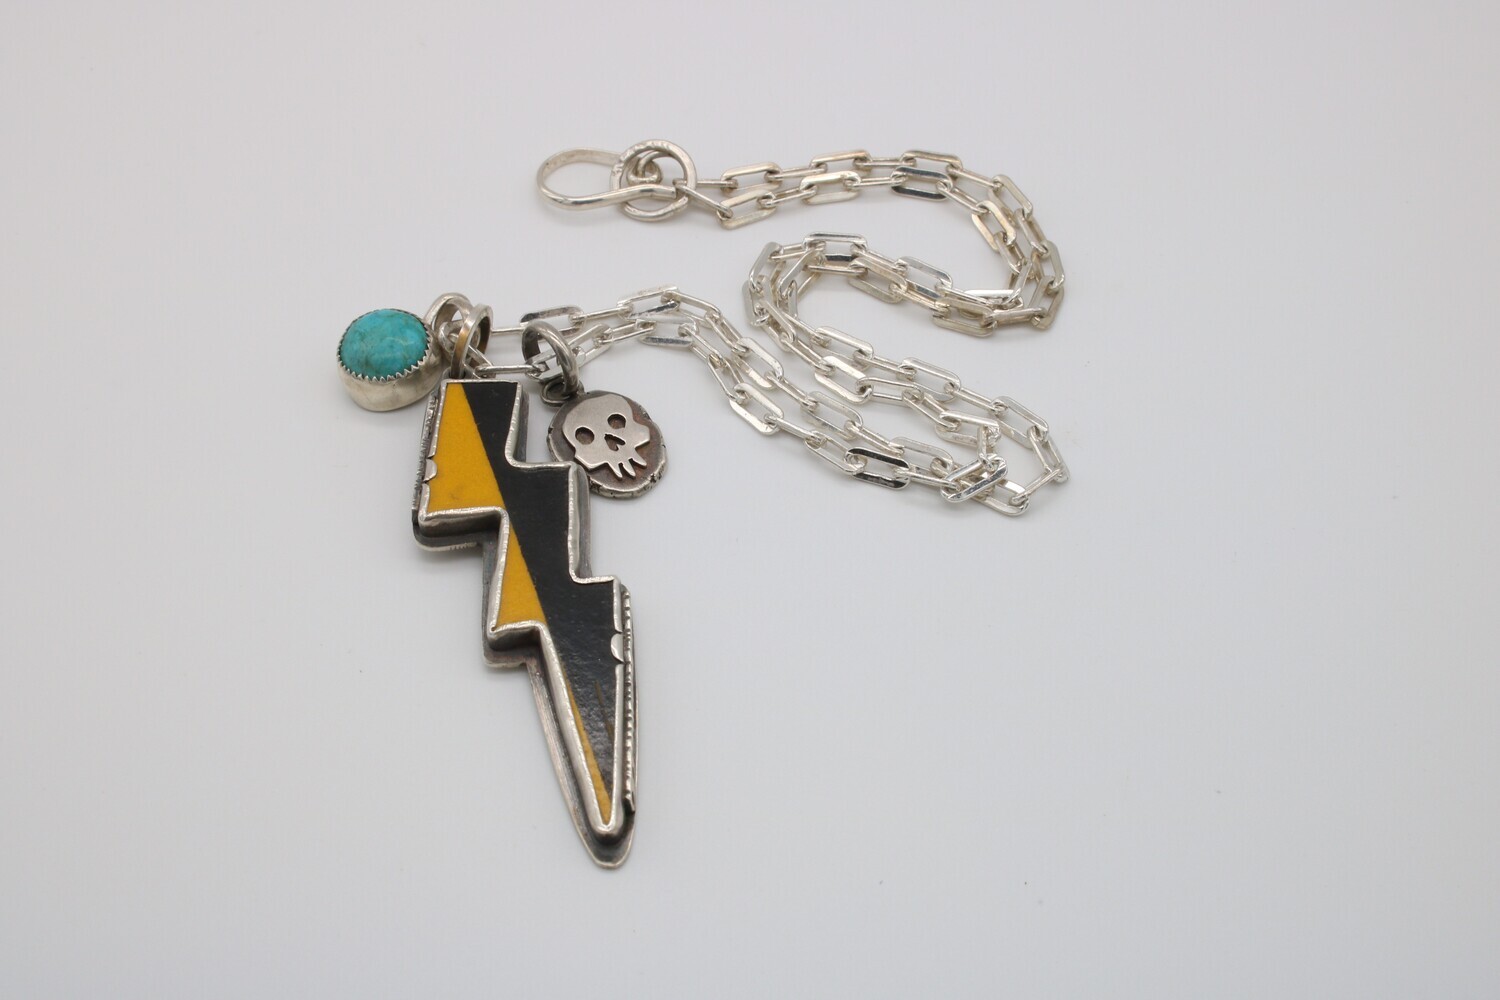 Amuck Design: Lighting Bolt Necklace with skull and turquoise charms